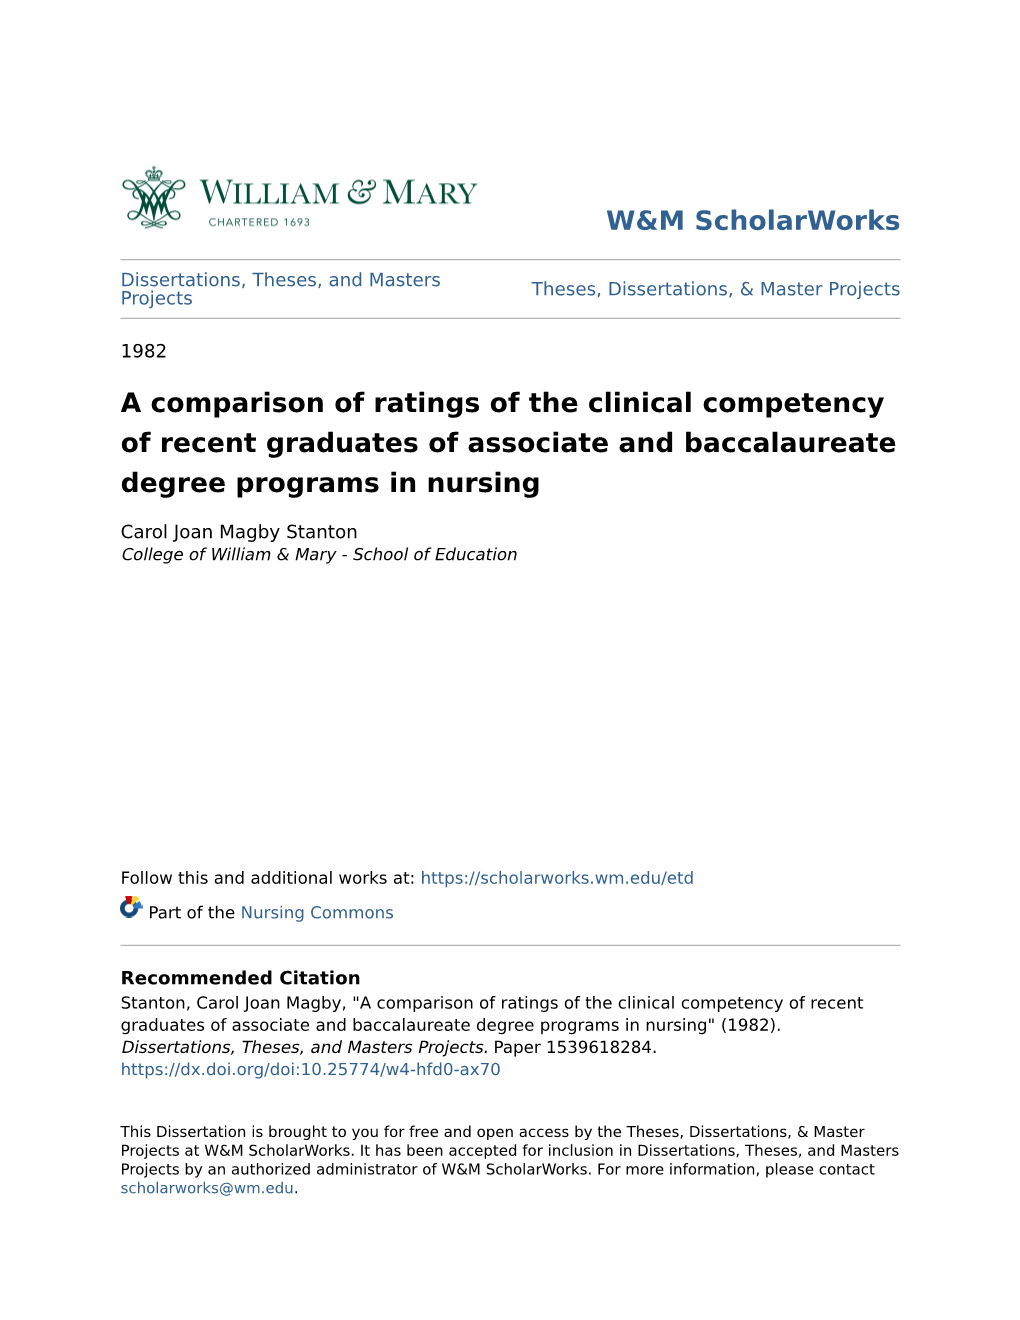 A Comparison of Ratings of the Clinical Competency of Recent Graduates of Associate and Baccalaureate Degree Programs in Nursing